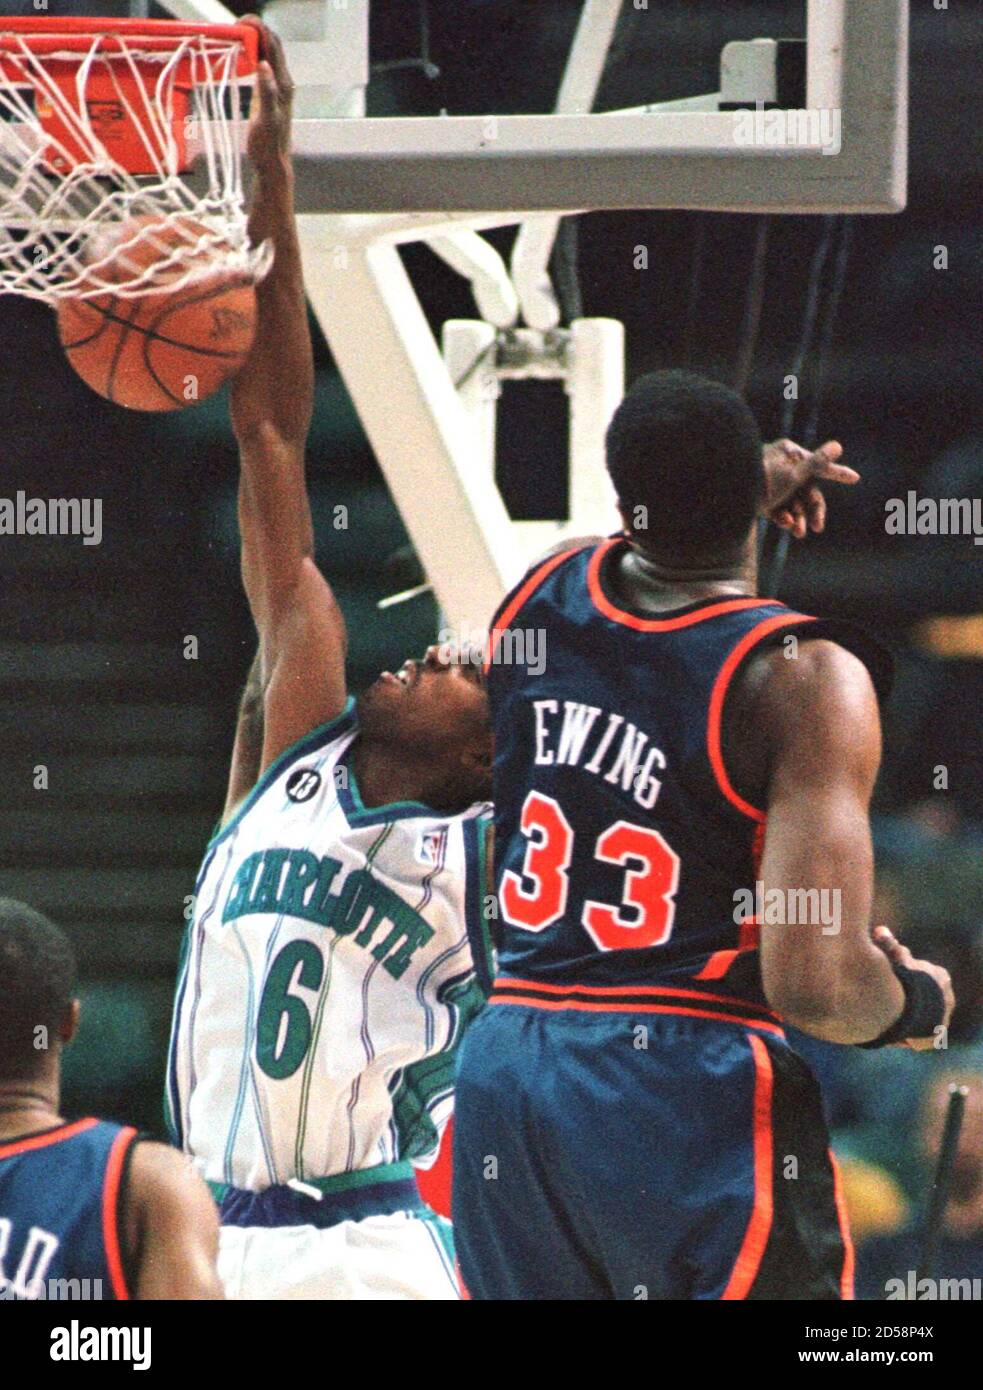 Charlotte Hornets' guard Eddie Jones hangs on the rim after dunking over  New York Knicks' center Patrick Ewing during first half NBA action,  February 7. This postponed game was rescheduled from December